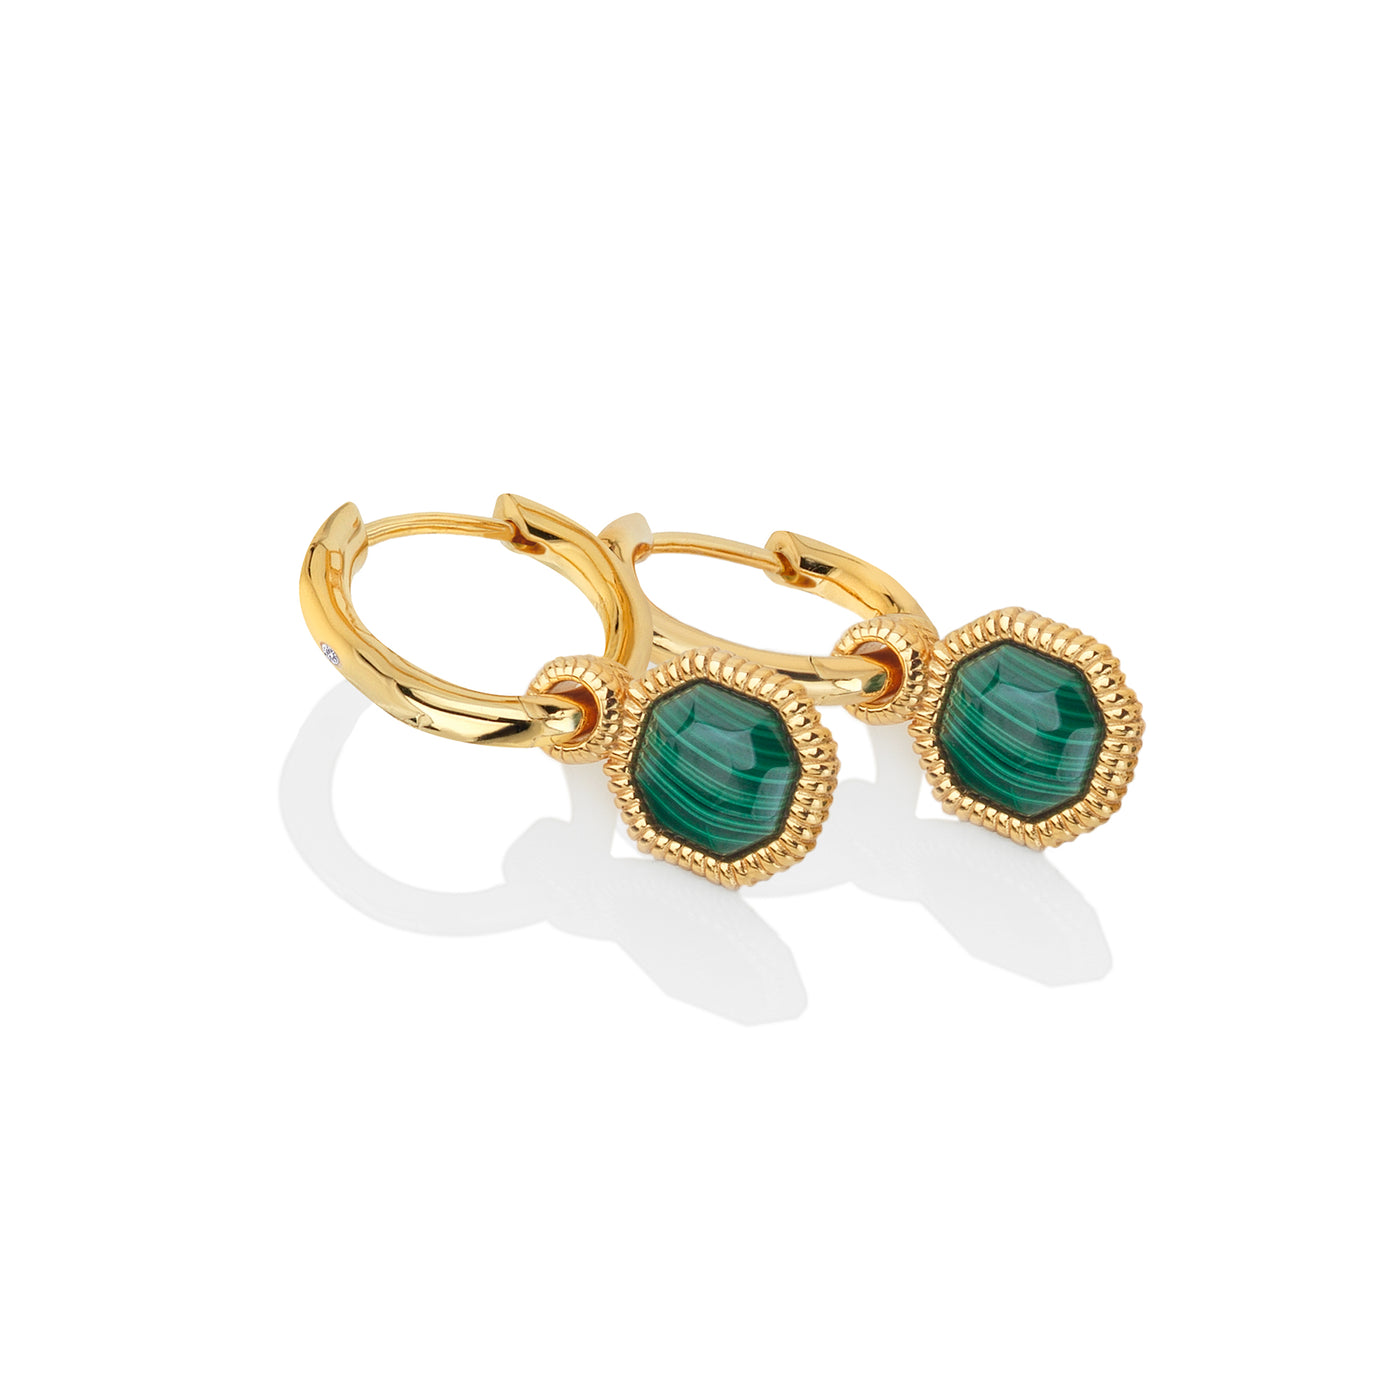 Hot Diamonds by Jac Jossa - 18ct Gold Plated Sterling Silver Revive Malachite Earrings